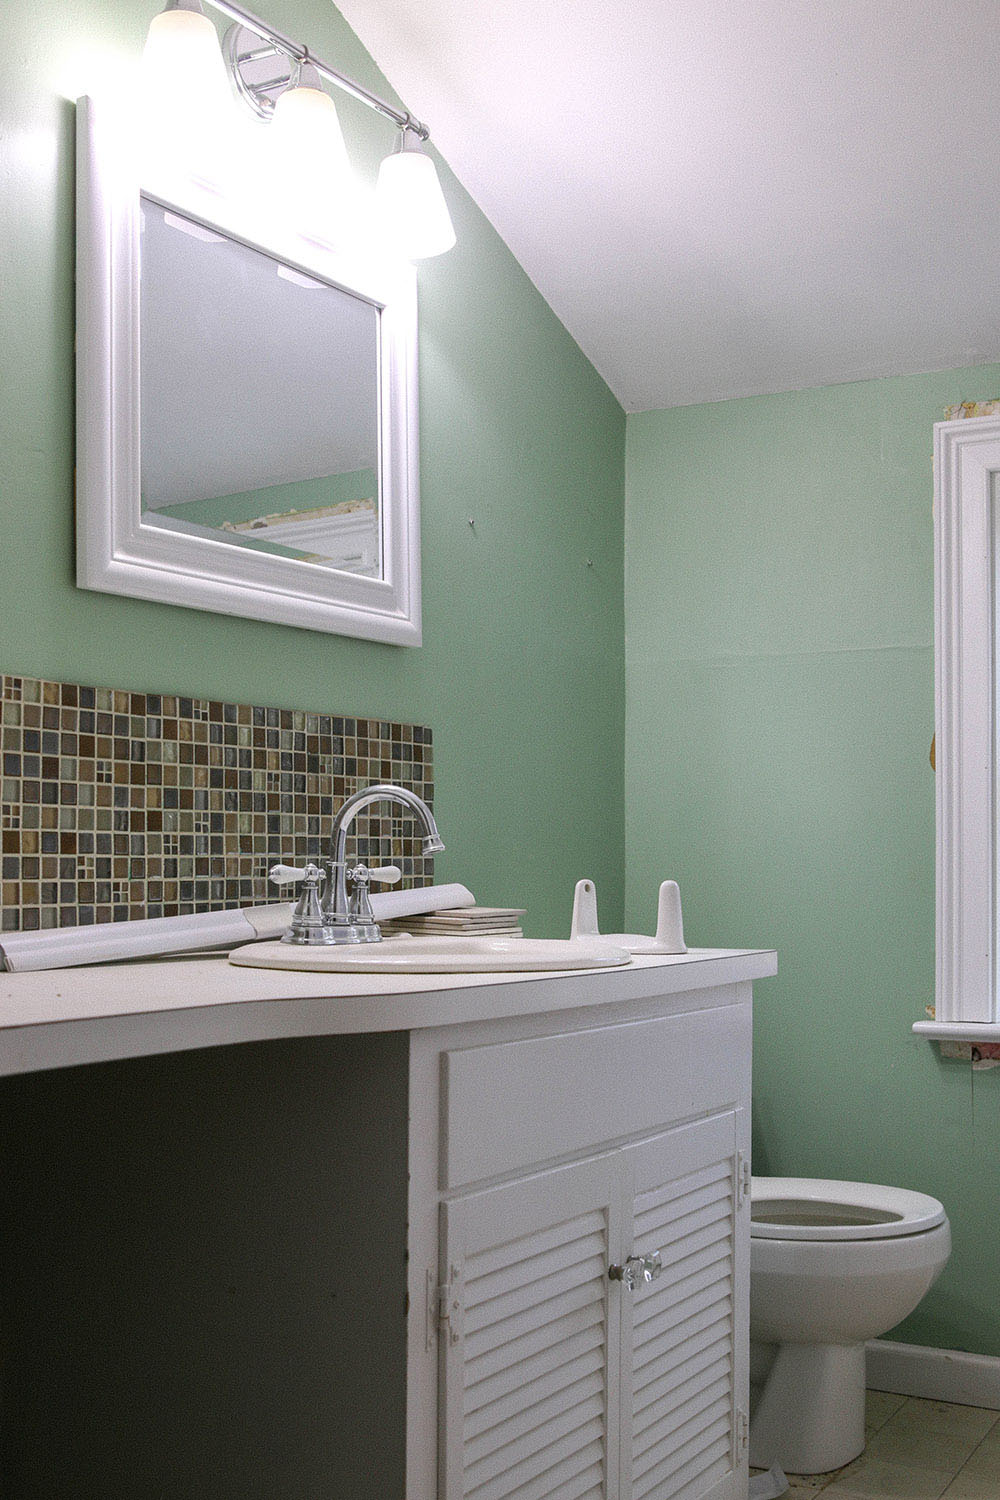 A bathroom with green walls and an old white vanity.